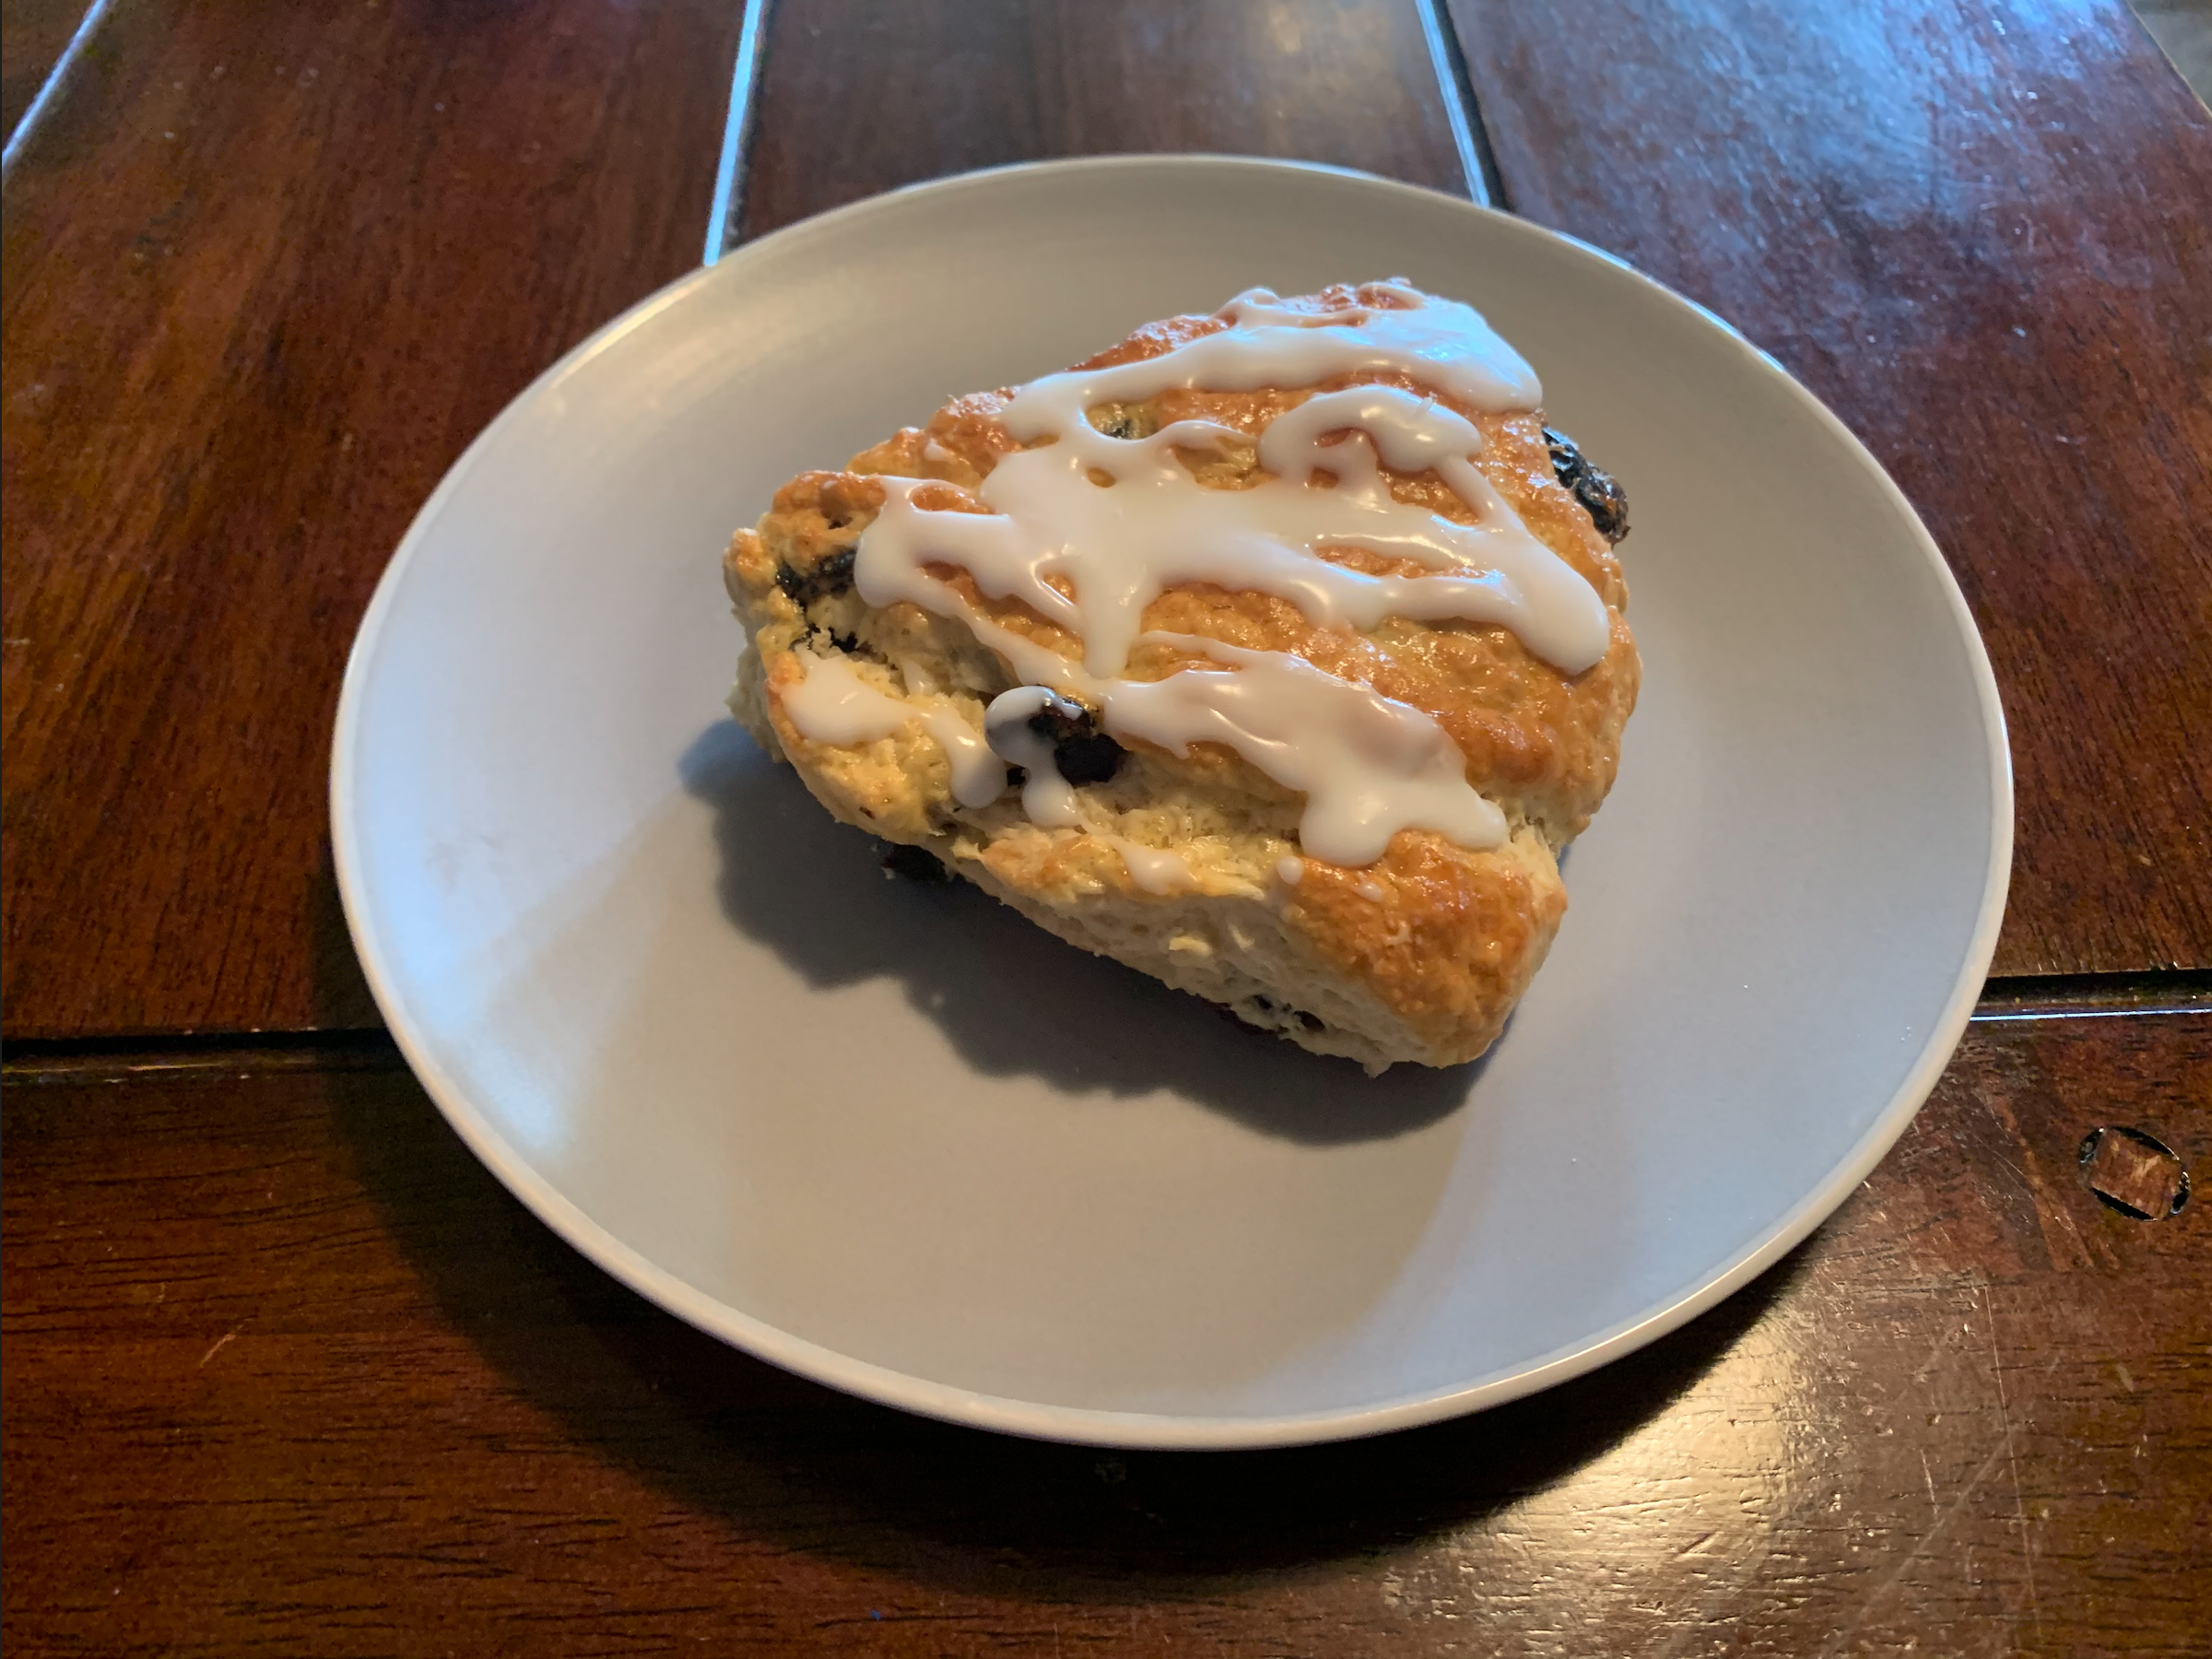 An iced cherry scone on a plate.